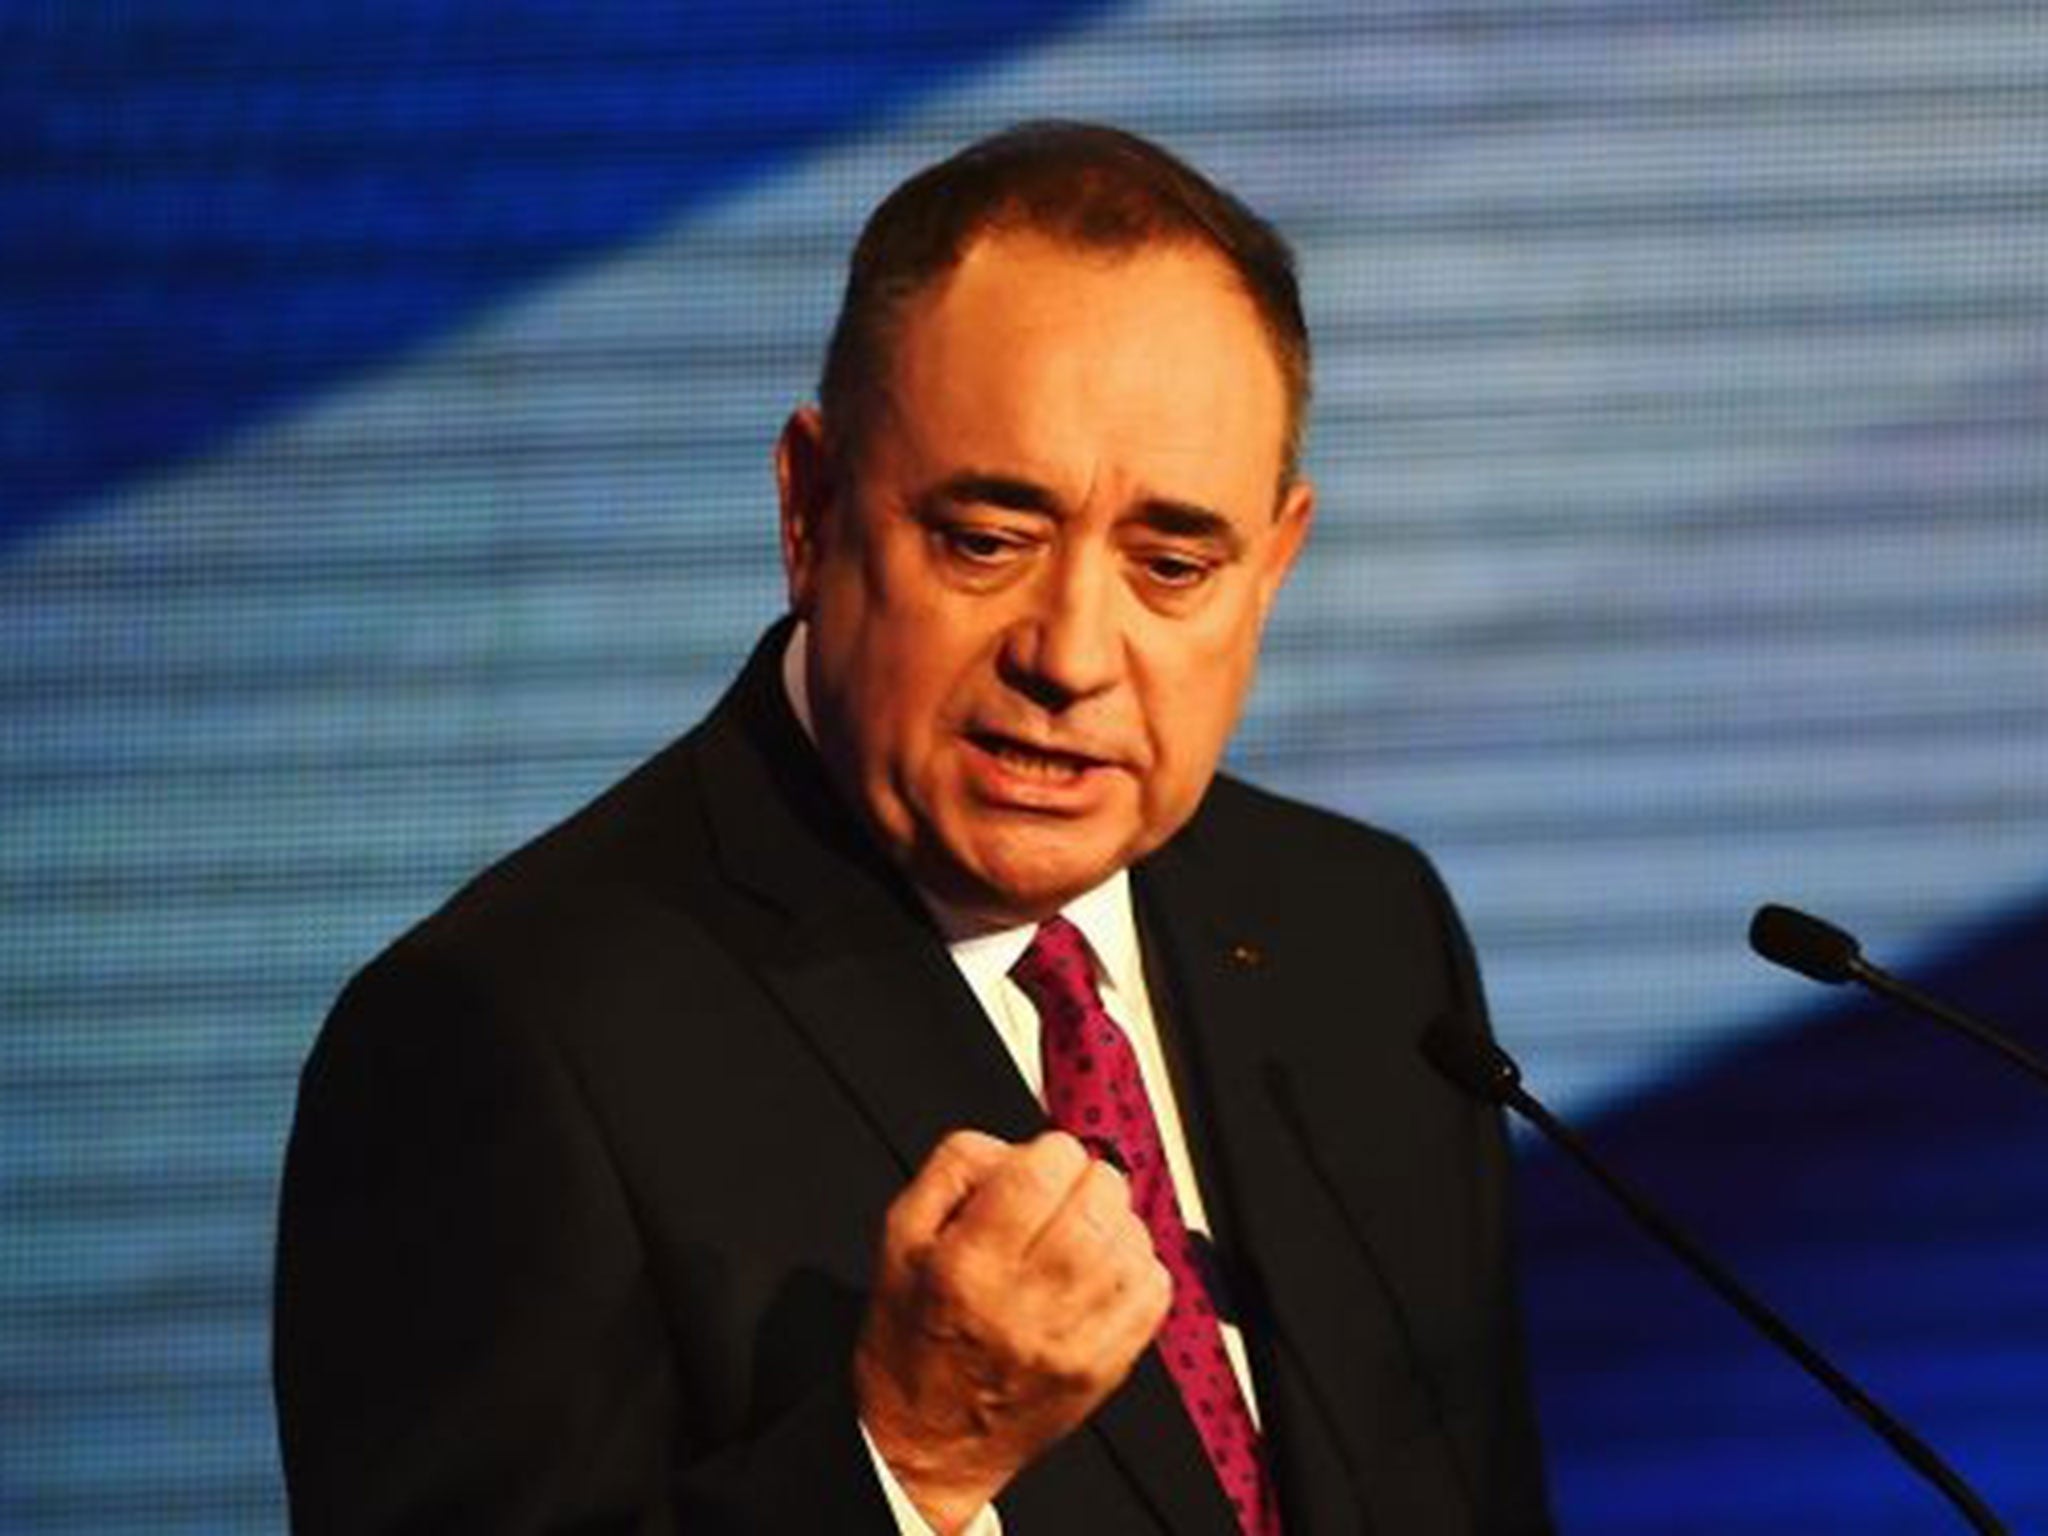 Alex Salmond during the live television debate with Alistair Darling at the Royal Conservatoire of Scotland on August 5, 2014 in Glasgow